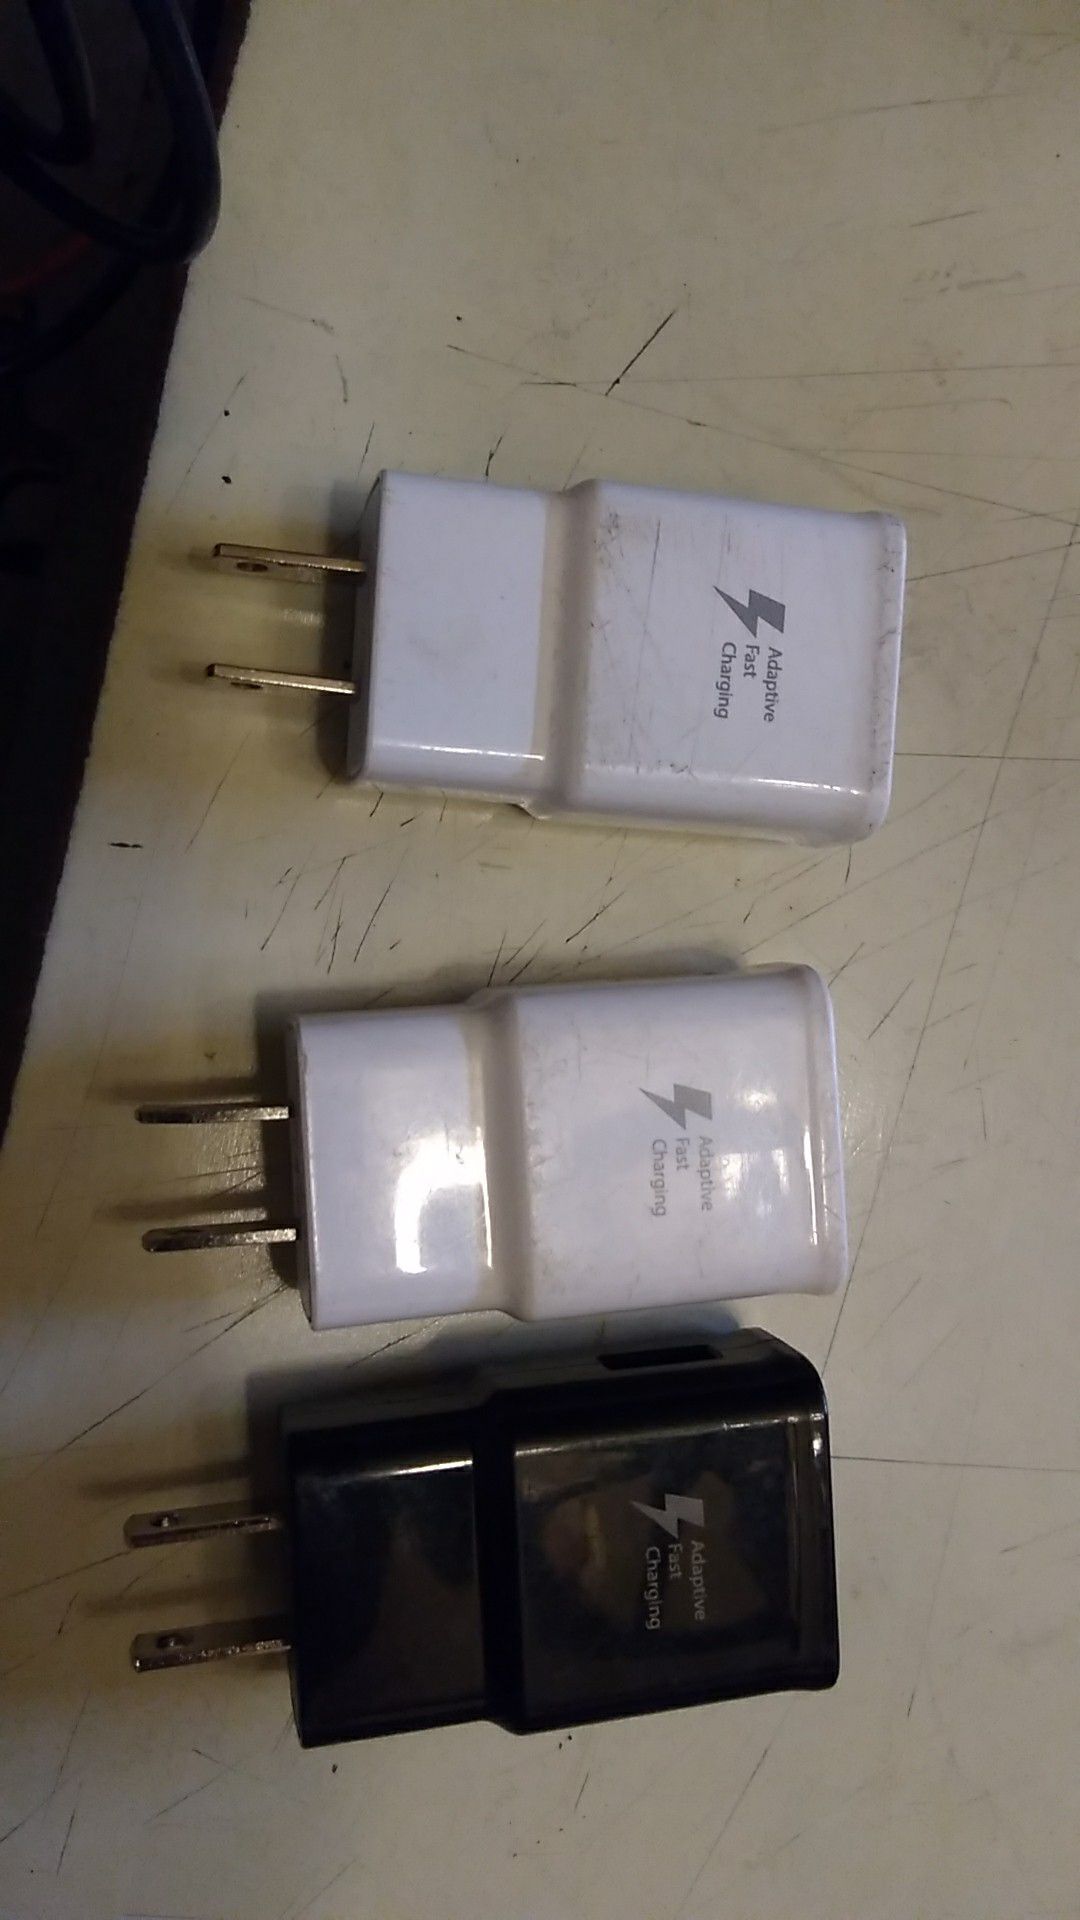 Speed chargers